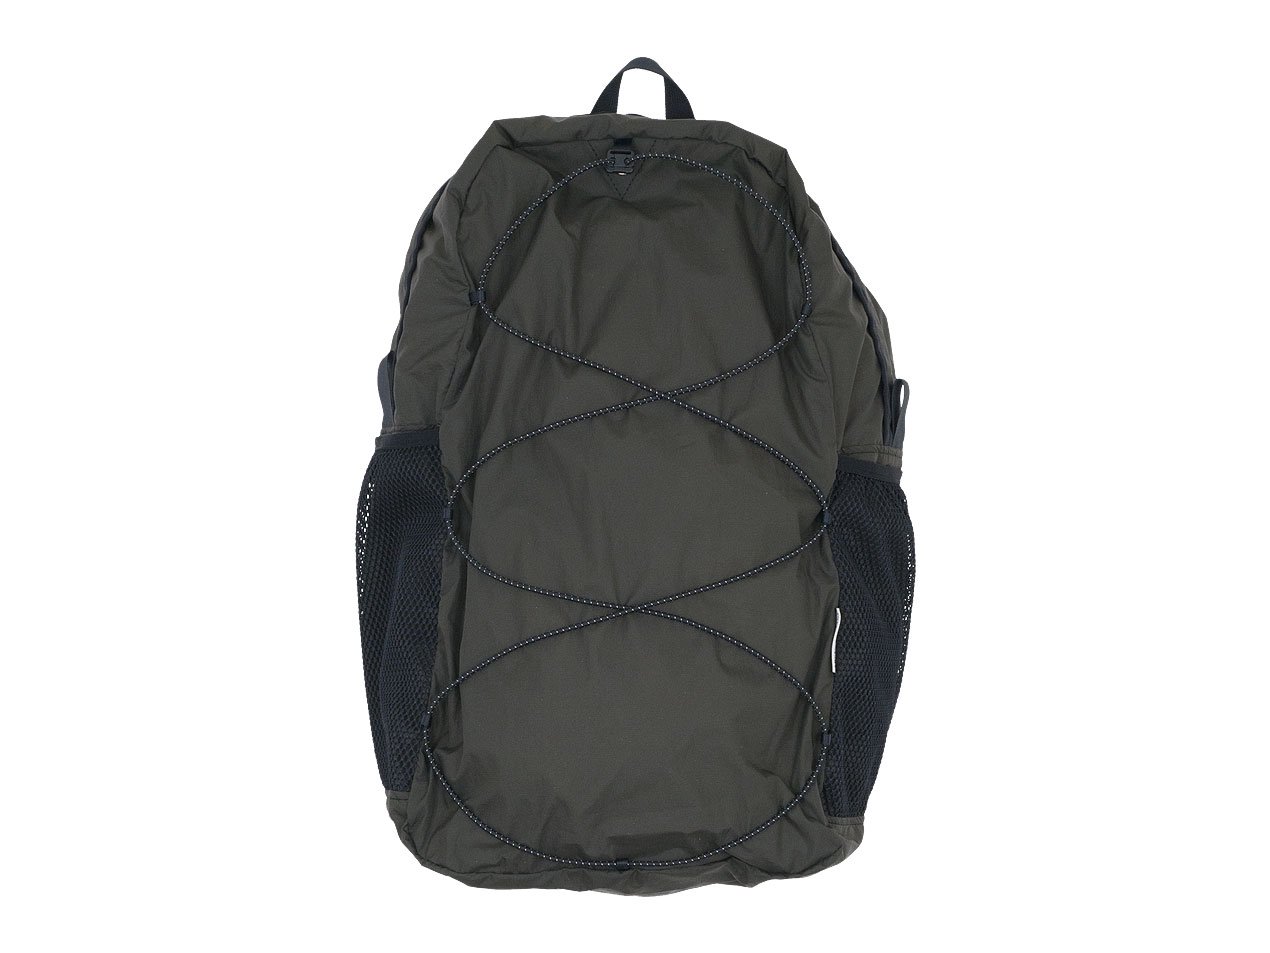 ENDS and MEANS DAYTRIP BACKPACK Black-